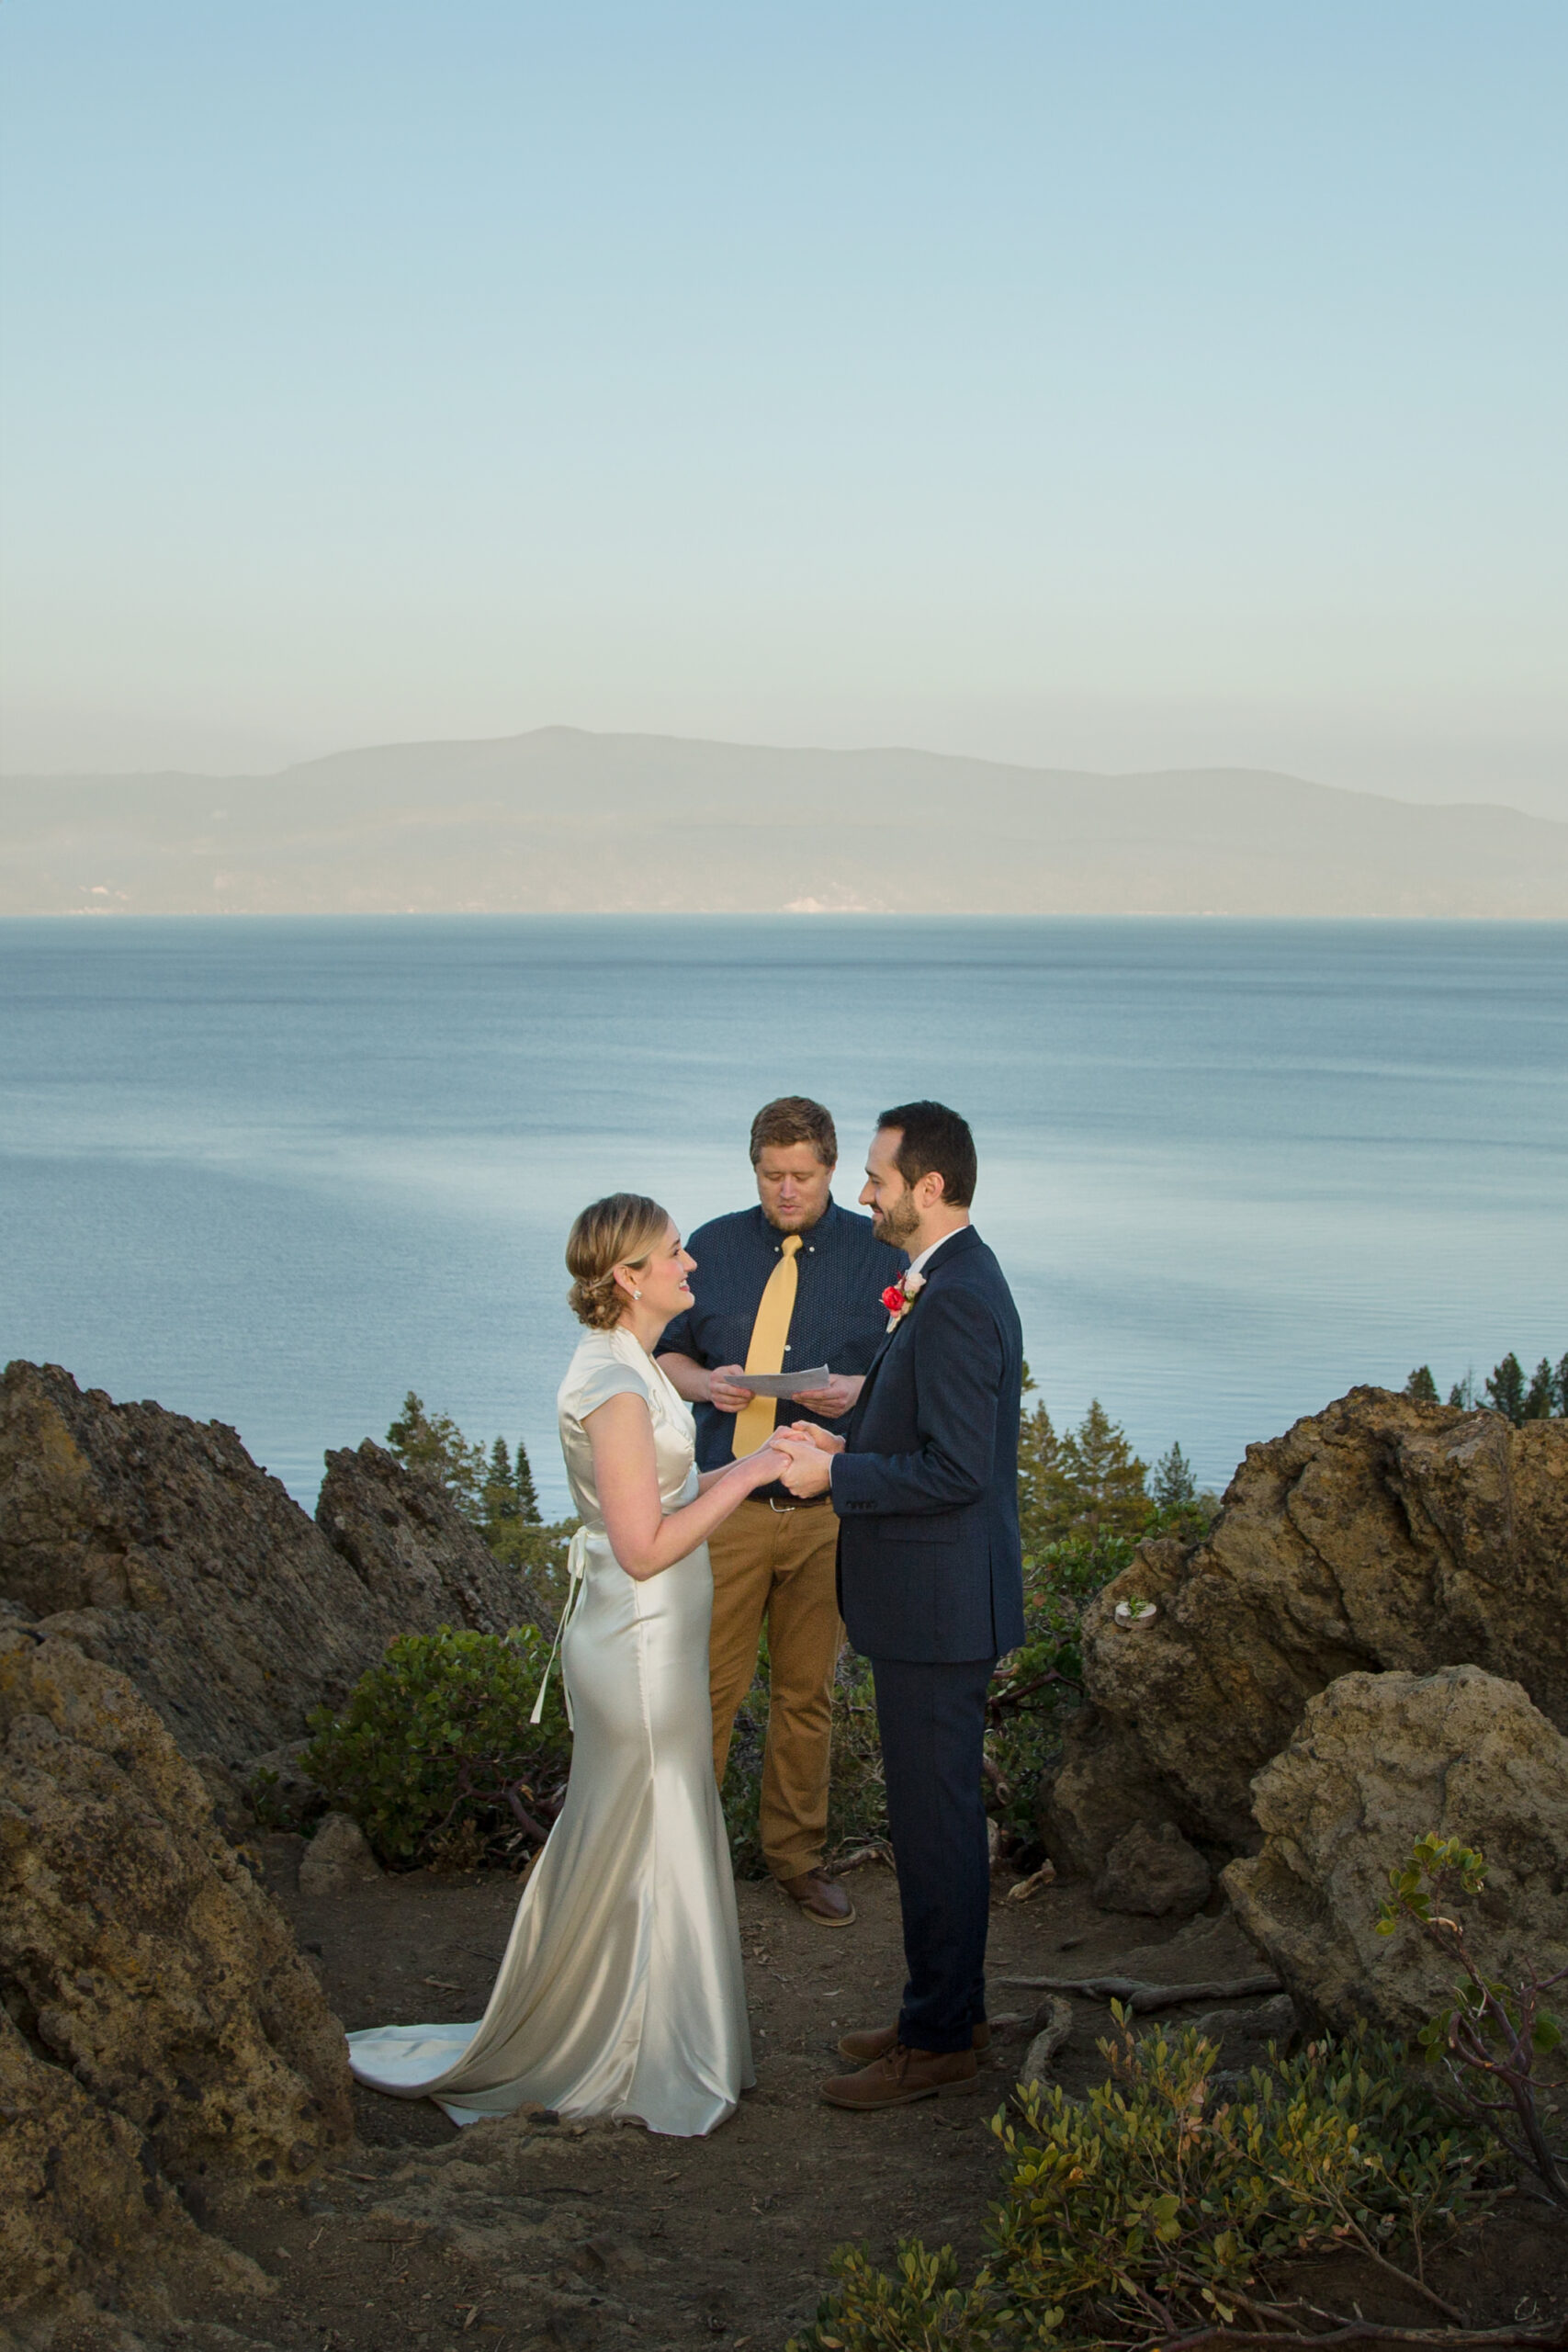 A bride, groom, and officiant at their Eagle Rock elopement wedding.